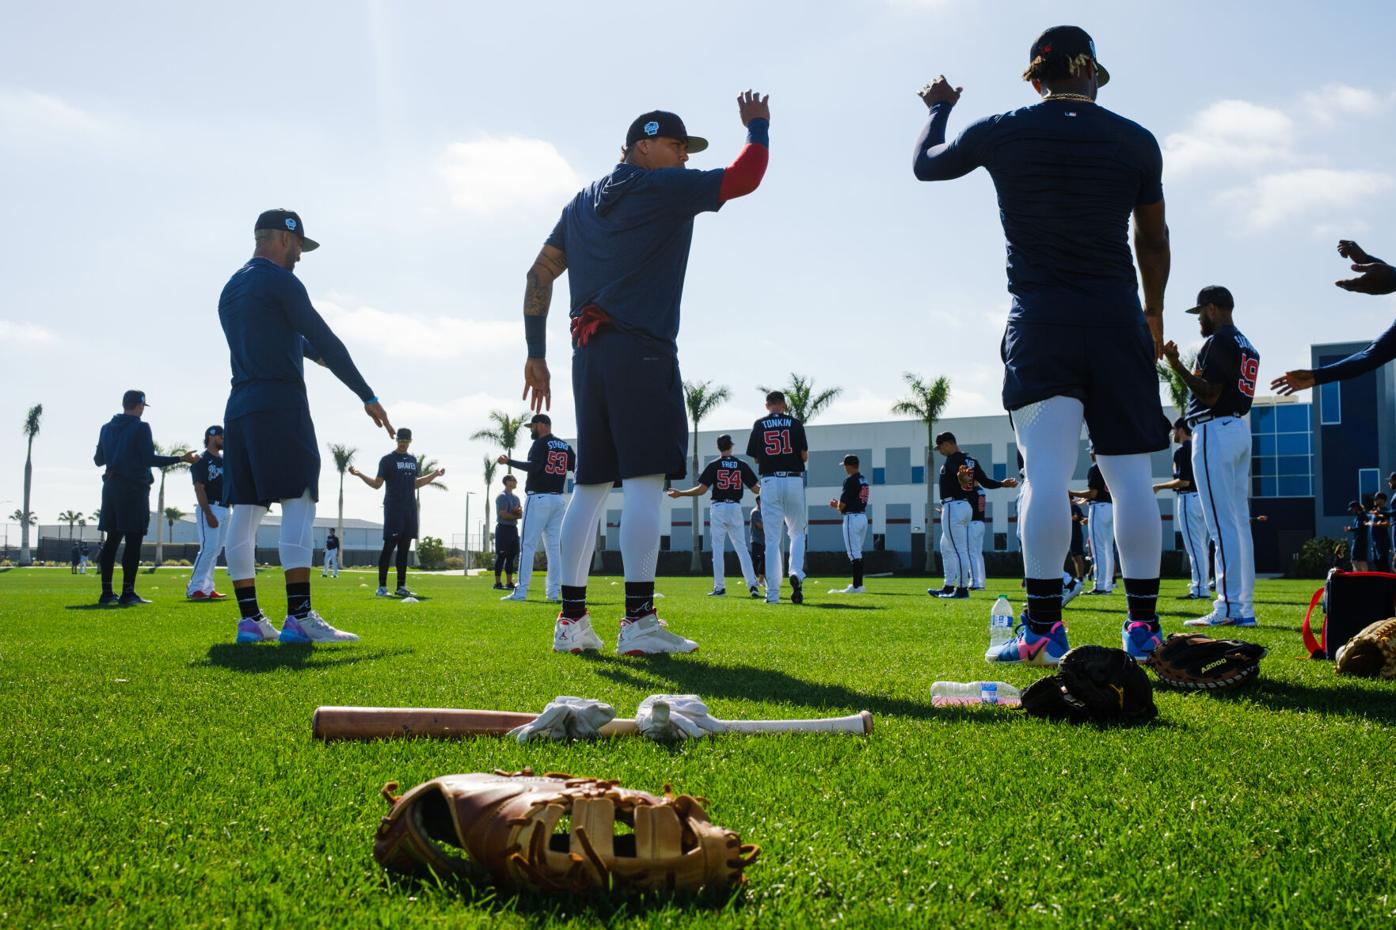 Braves Spring Training in North Port, Florida, Local News